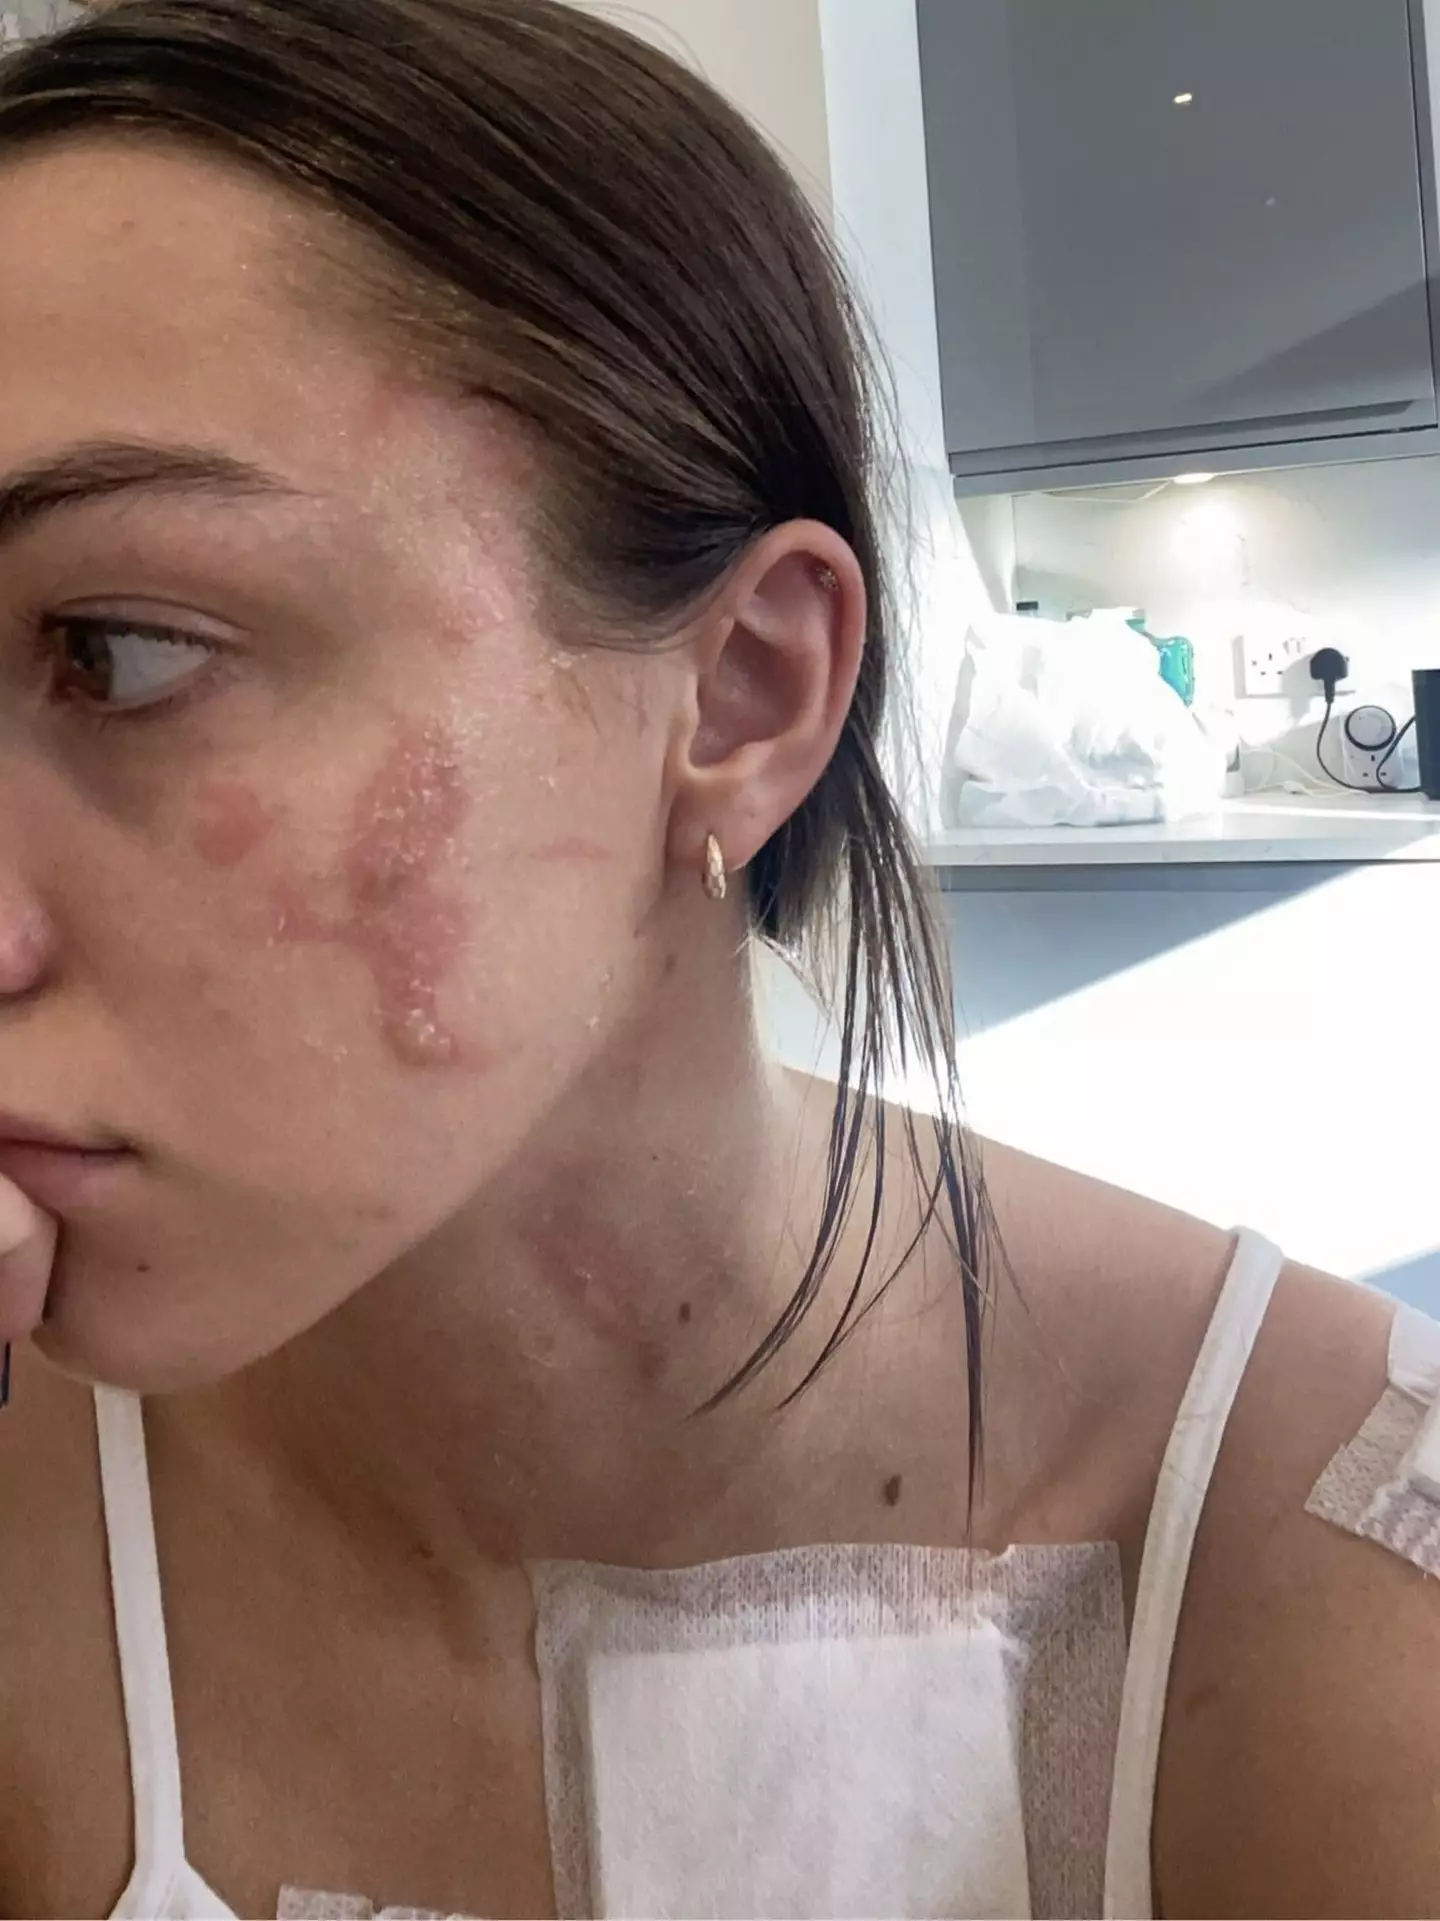 She suffered second degree burns. (Kennedy News and Media)